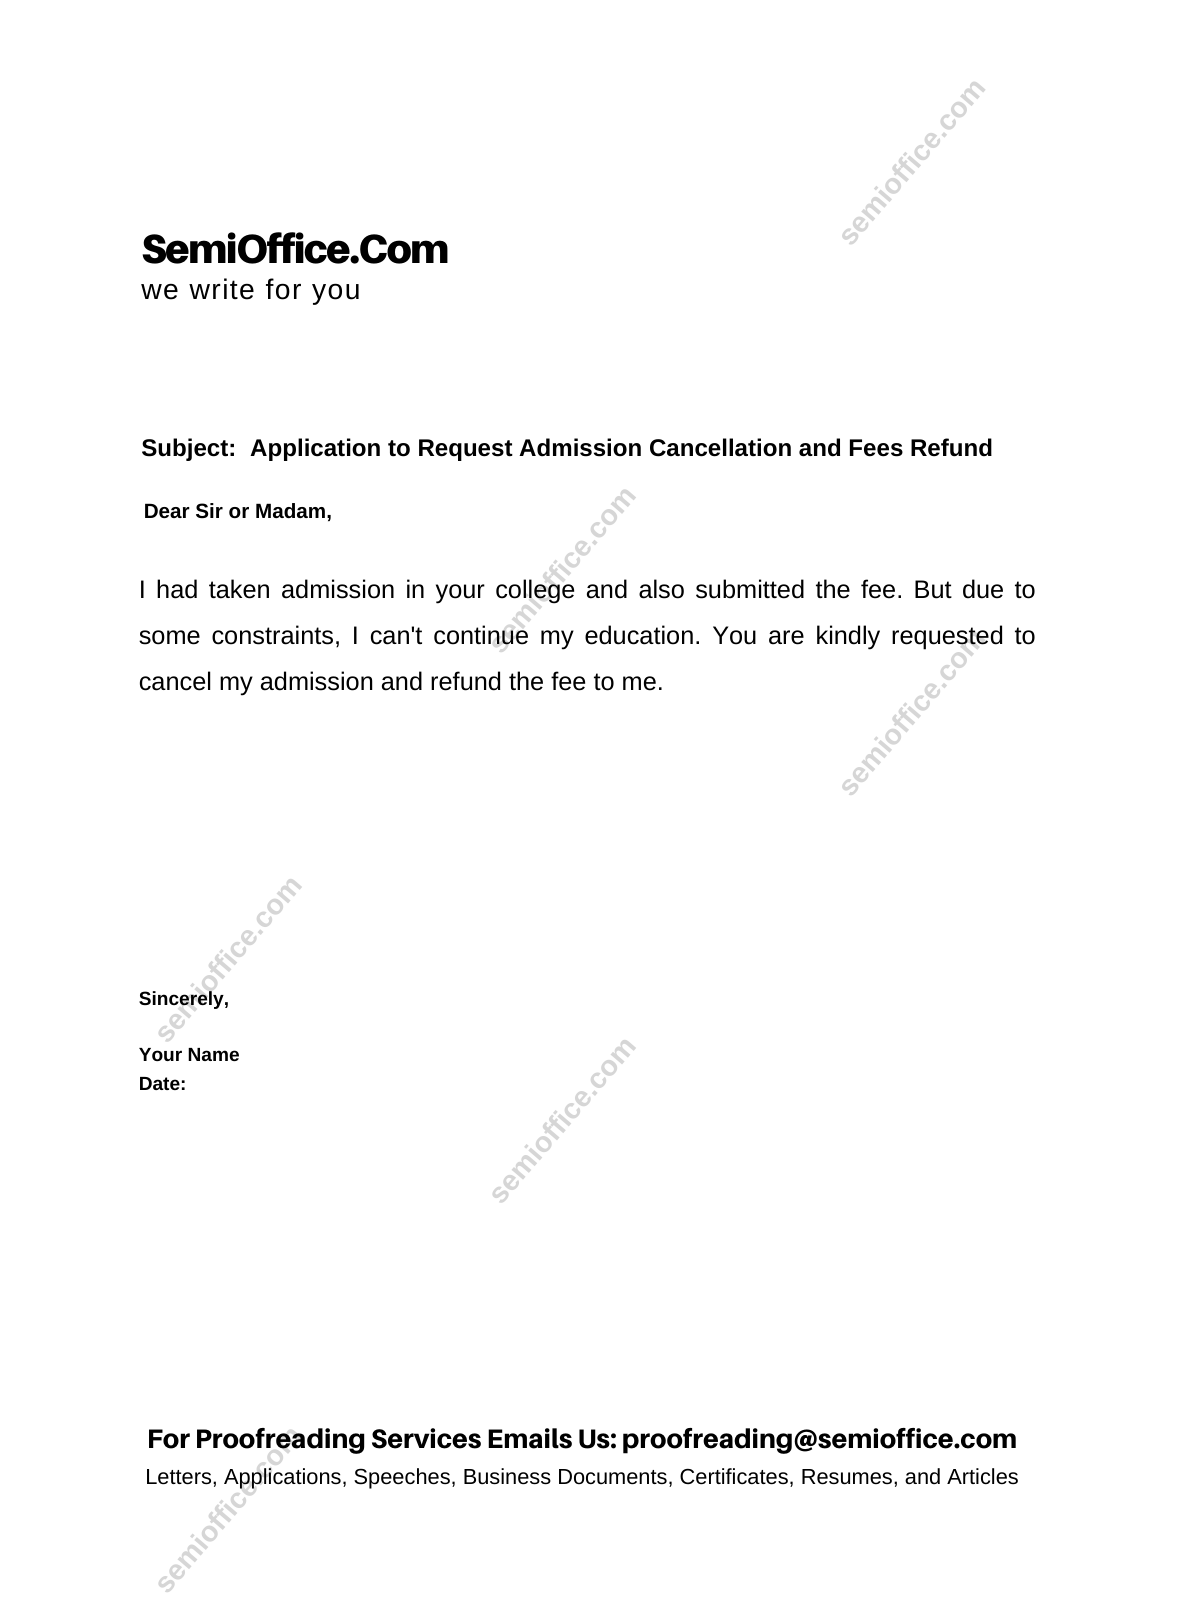 application-for-cancellation-of-admission-and-refund-of-fees